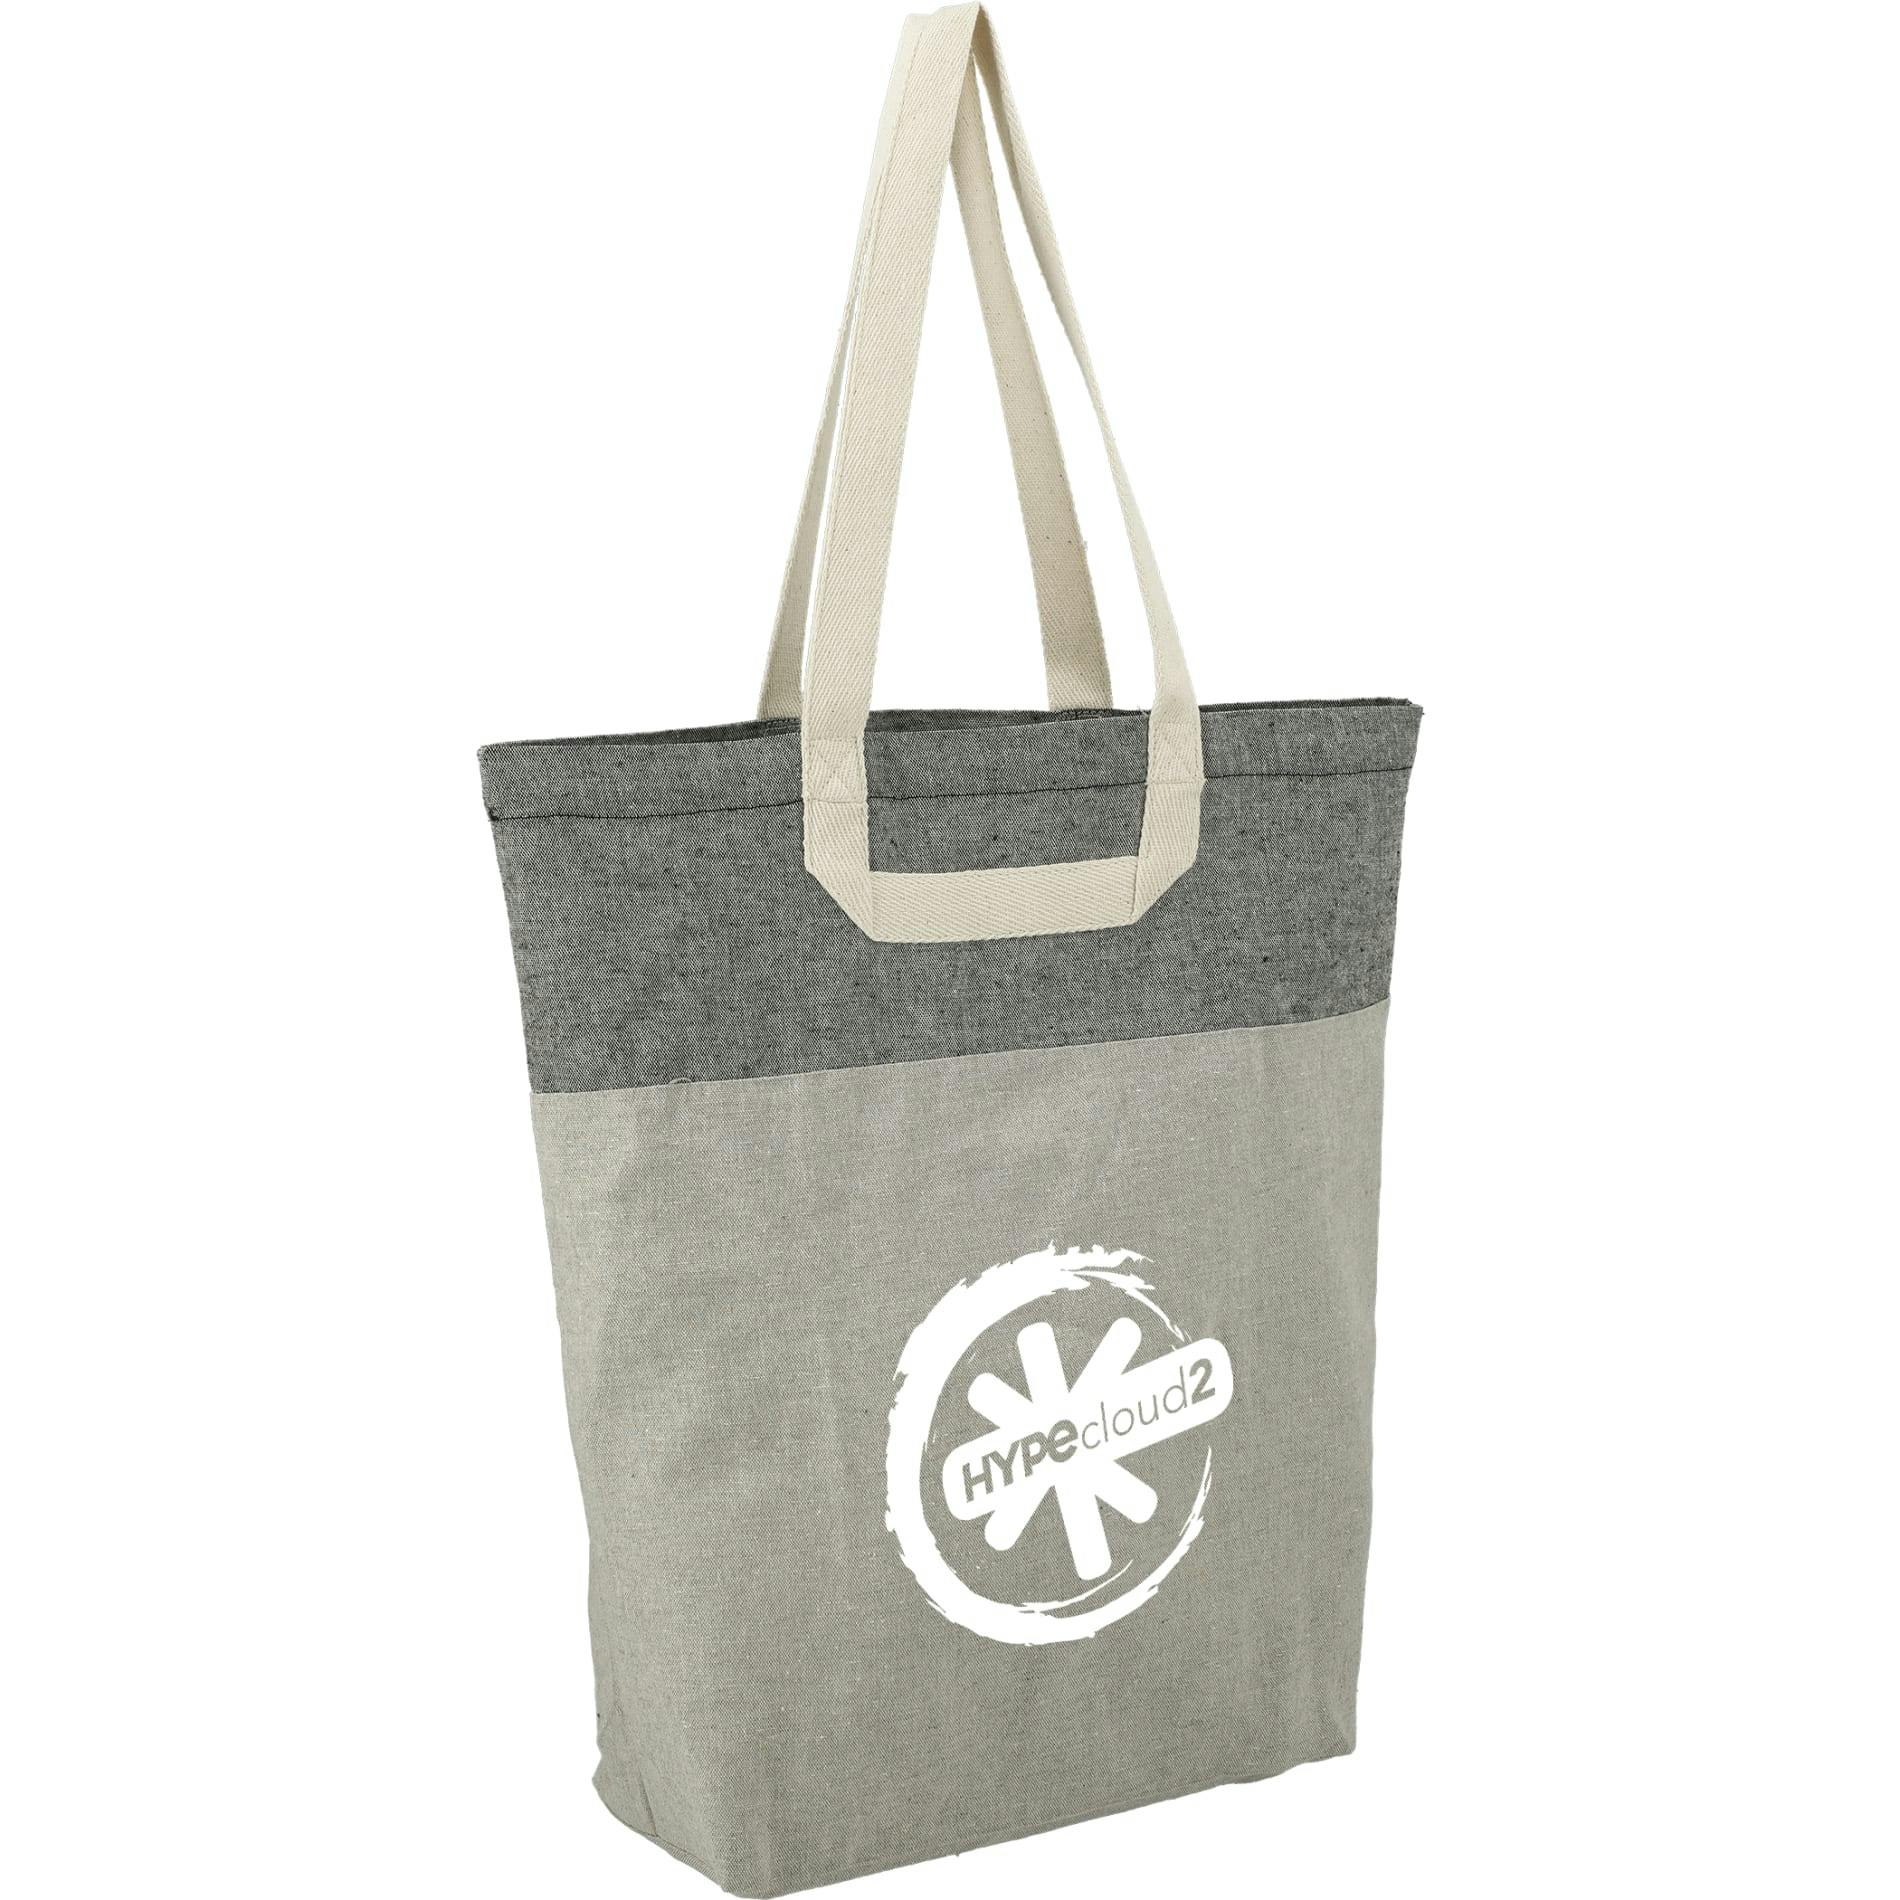 Recycled Cotton U-Handle Book Tote - additional Image 4